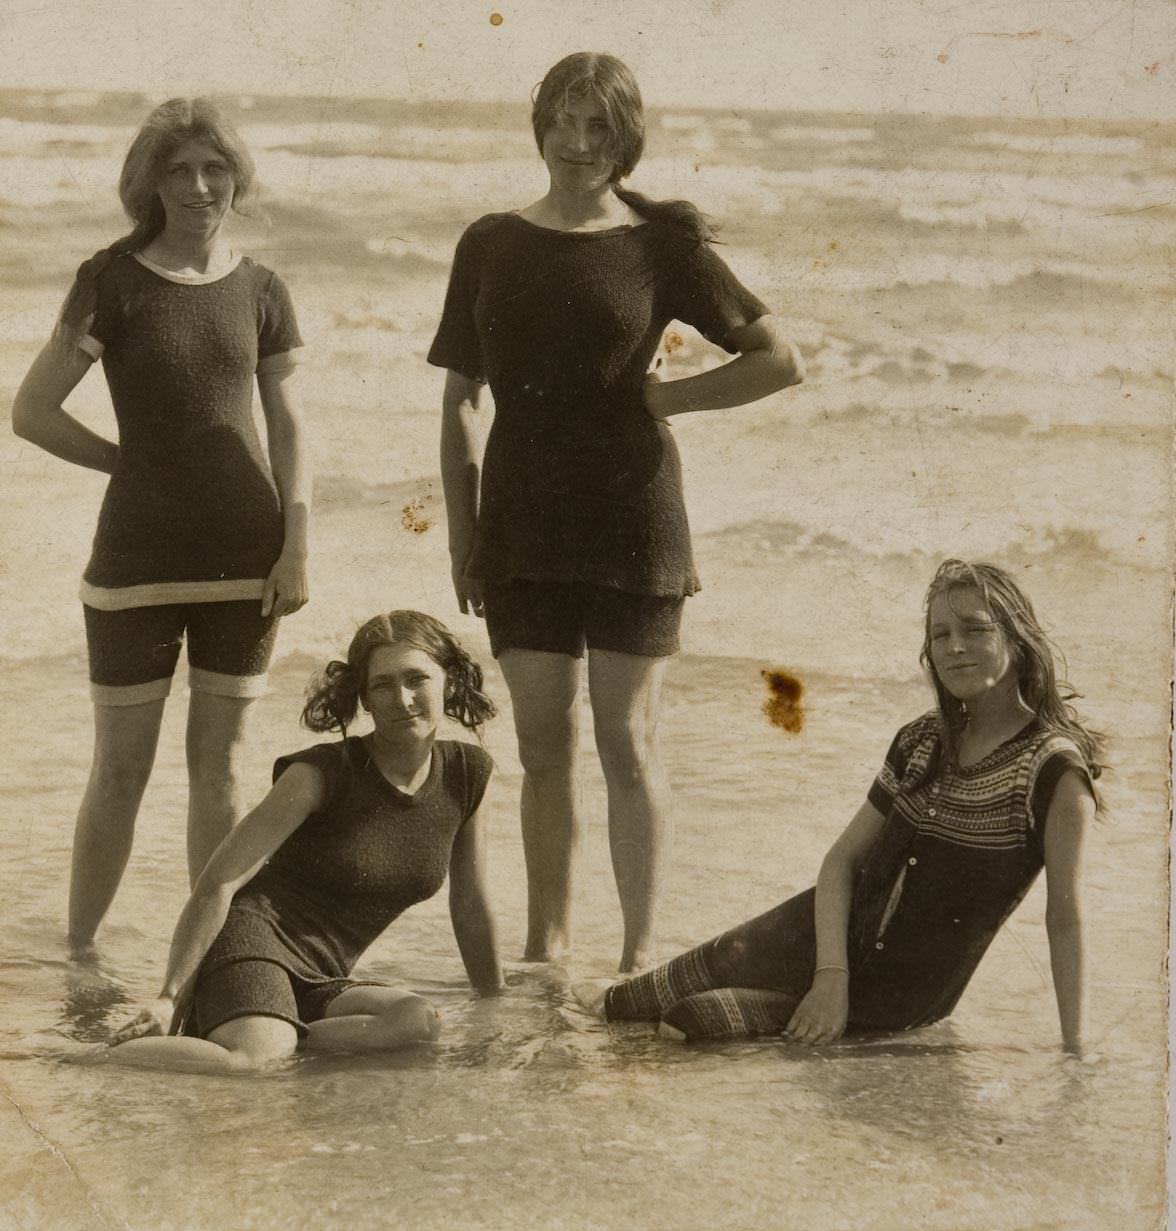 Young ladies at the beach near Melbourne, Australia in 1910.